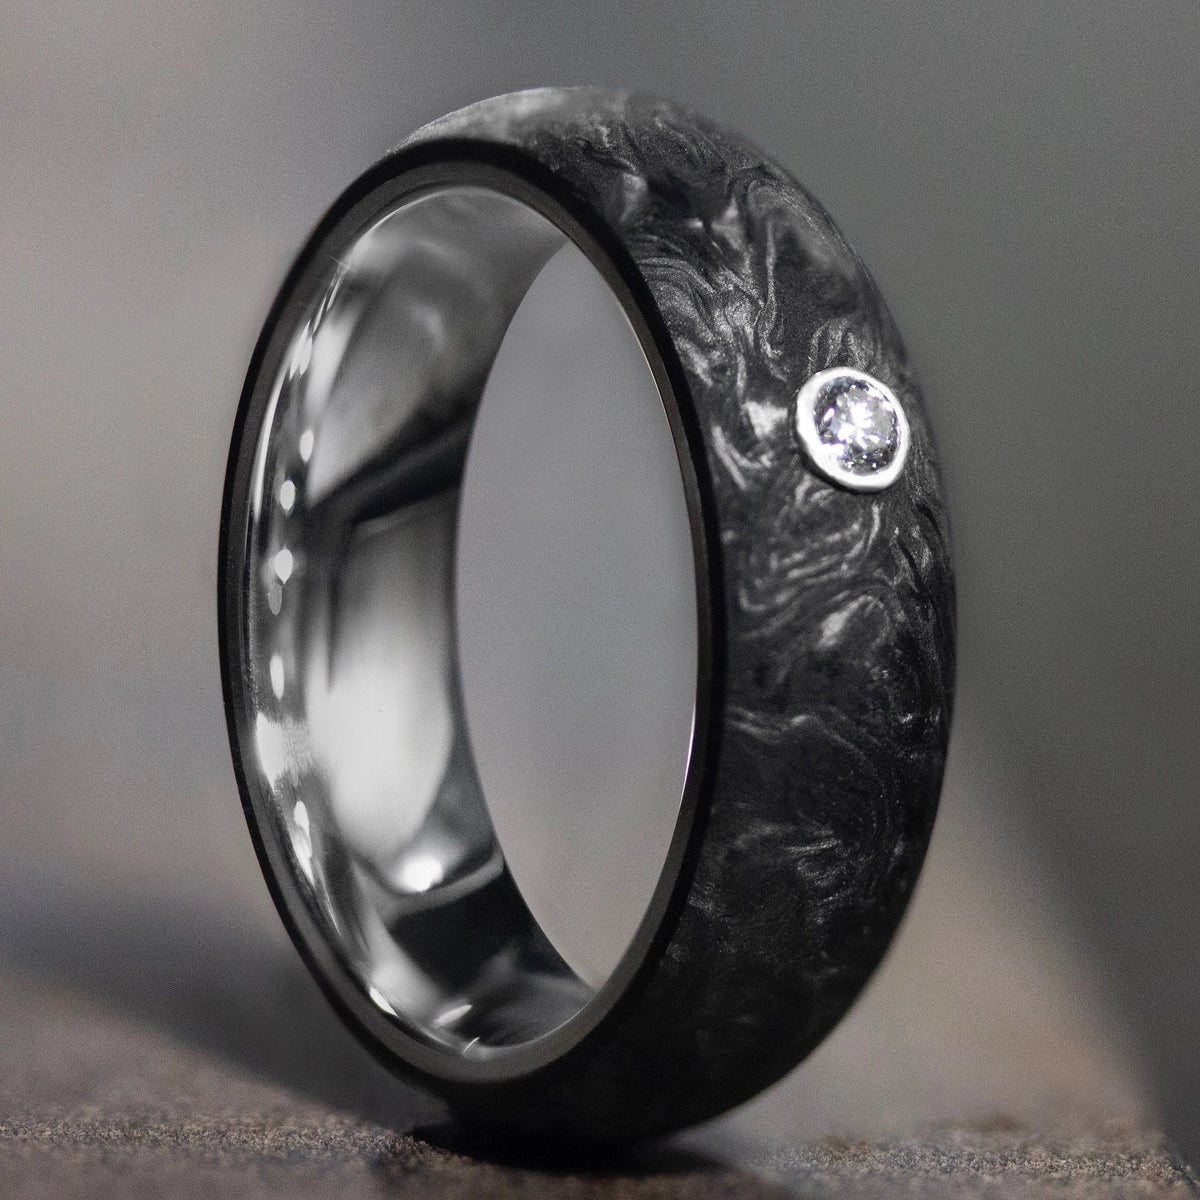 Forged Carbon Fiber Ring with a Diamond insert. Handmade in Brooklyn, New York by Carbon6. 